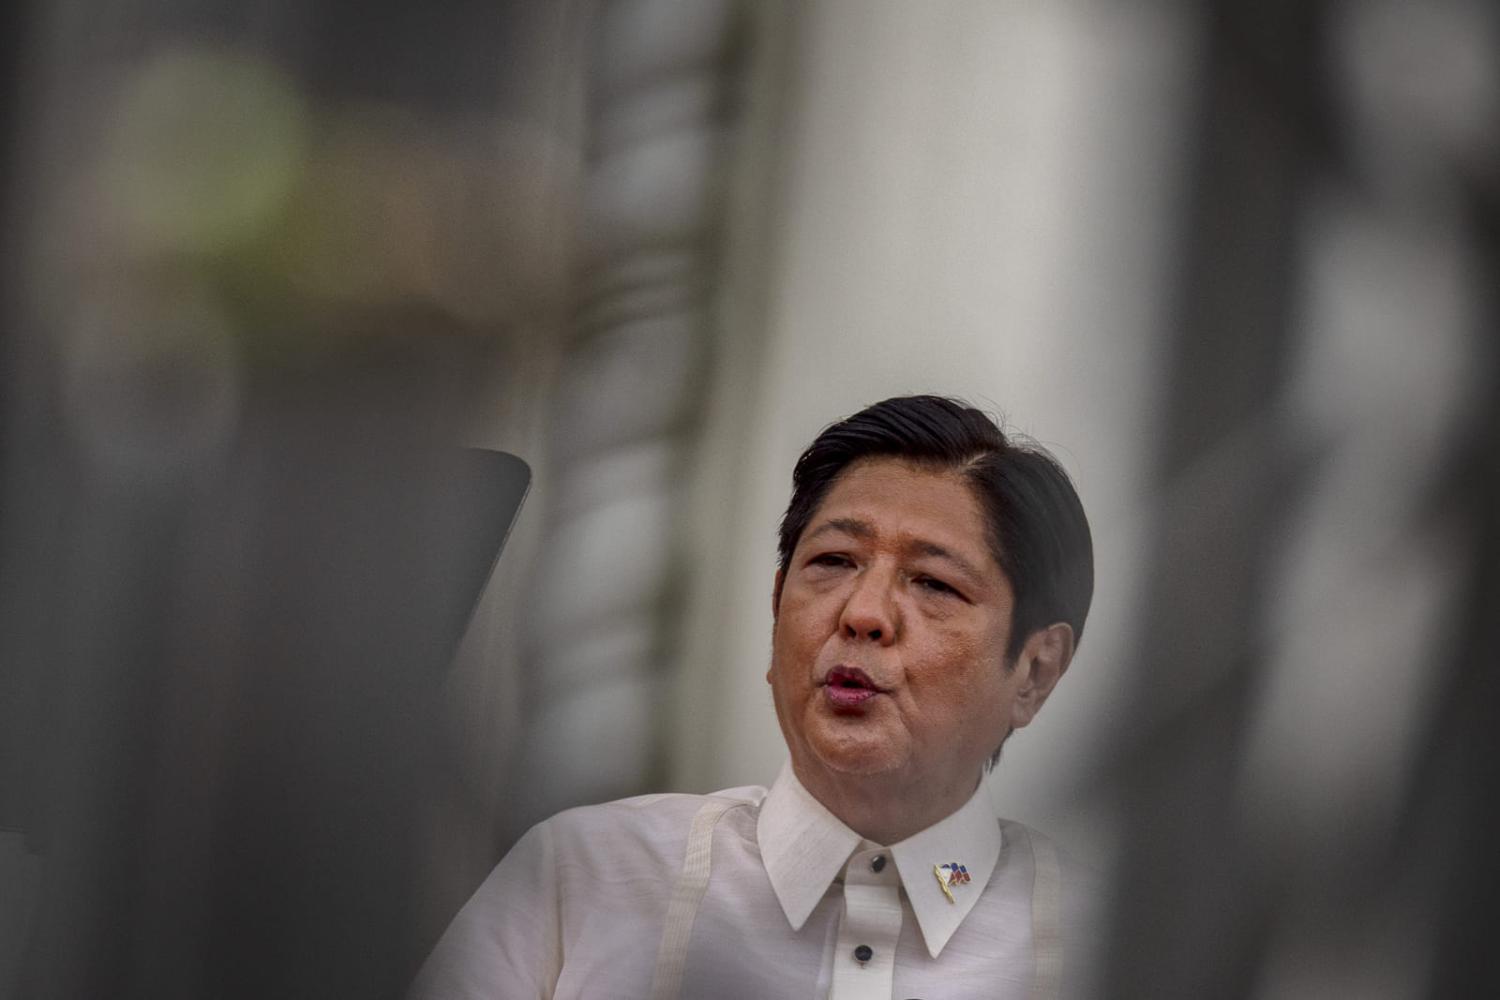 Ferdinand "Bongbong" Marcos Jr. after taking his oath as Philippine President on 30 June (Ezra Acayan/Getty Images)